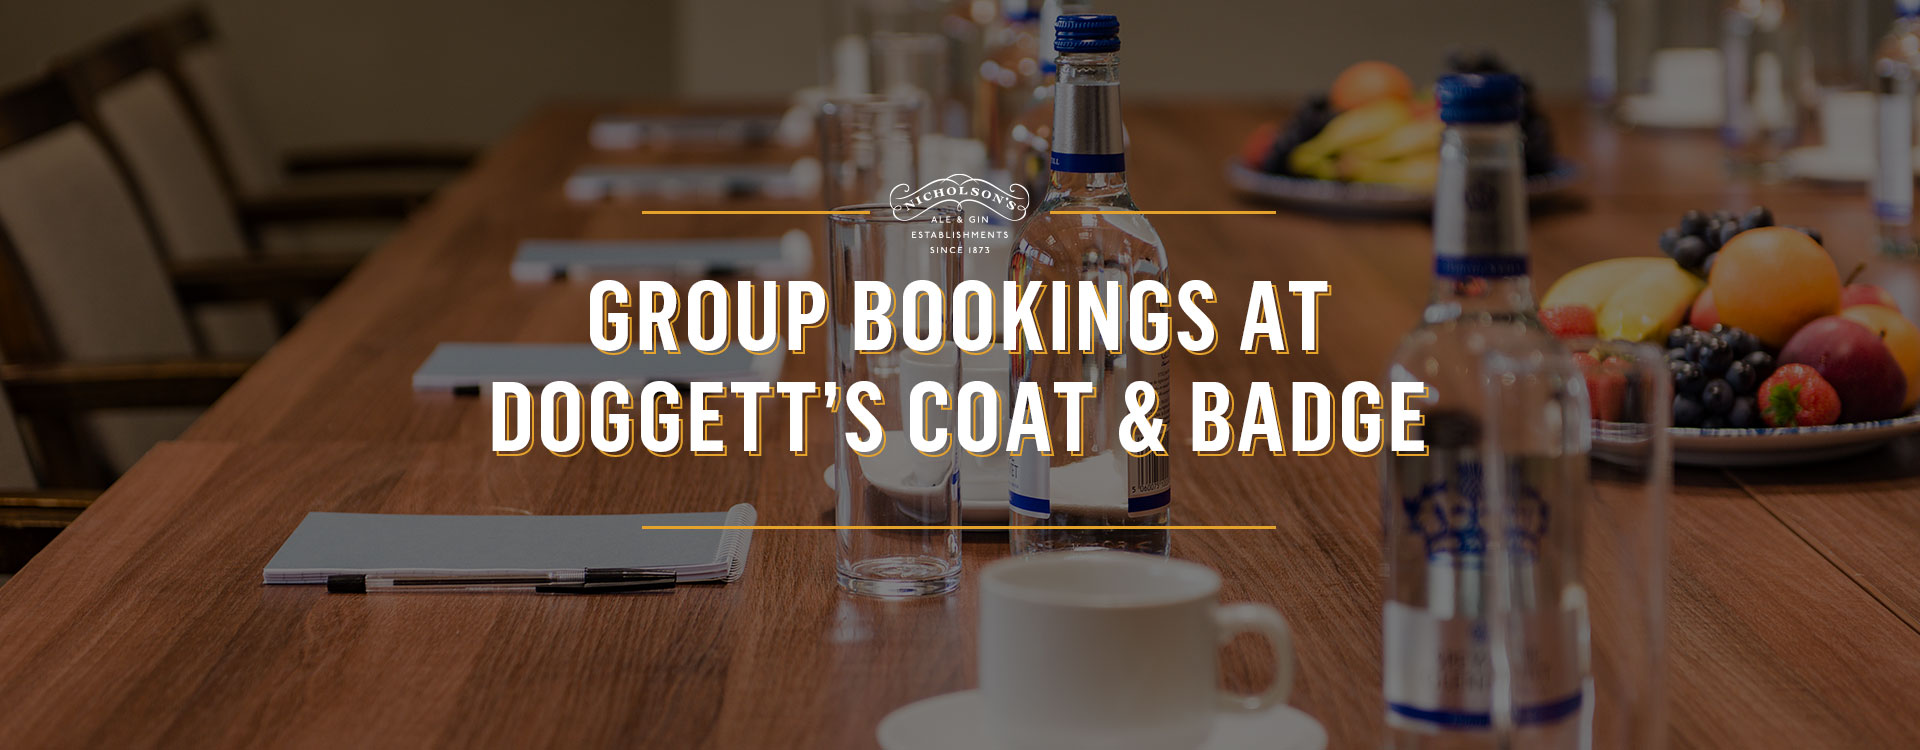 Group Bookings at Doggett's Coat and Badge